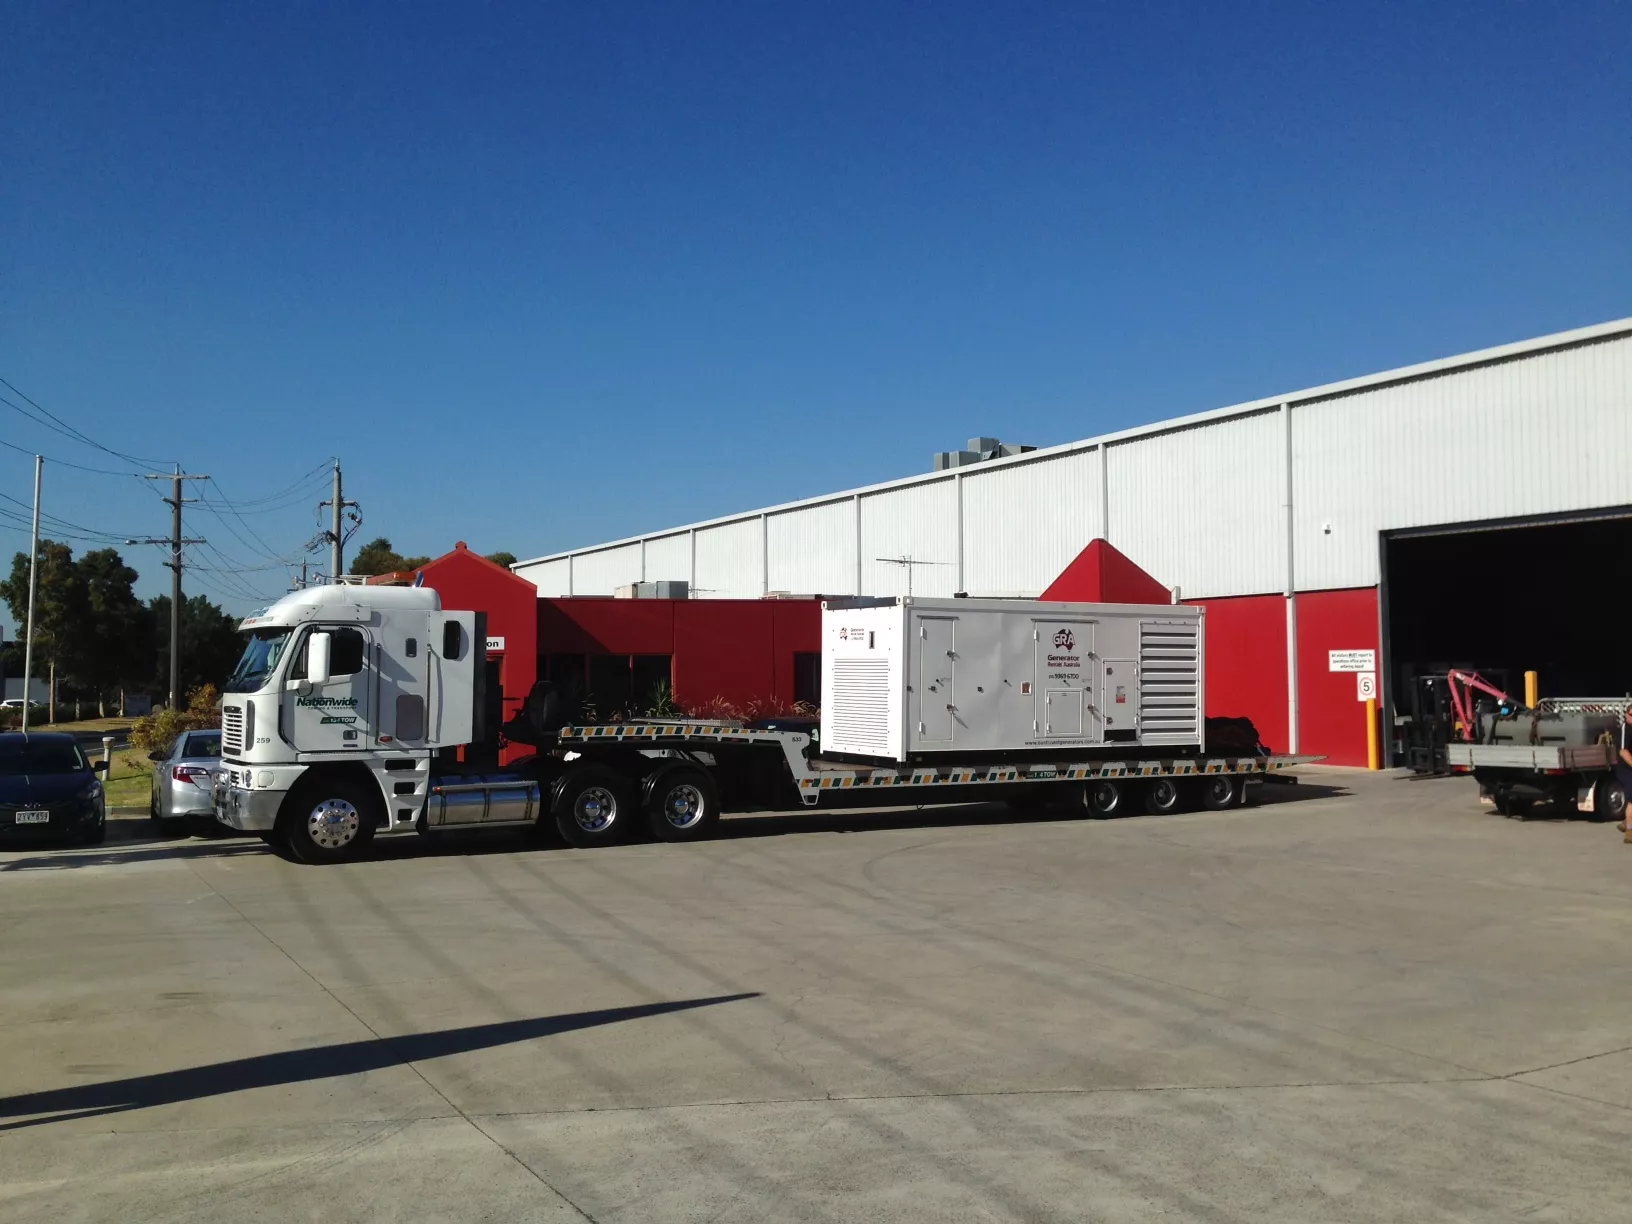 February, 2015 – Lookout for the big rigs in Westgate	Drive!